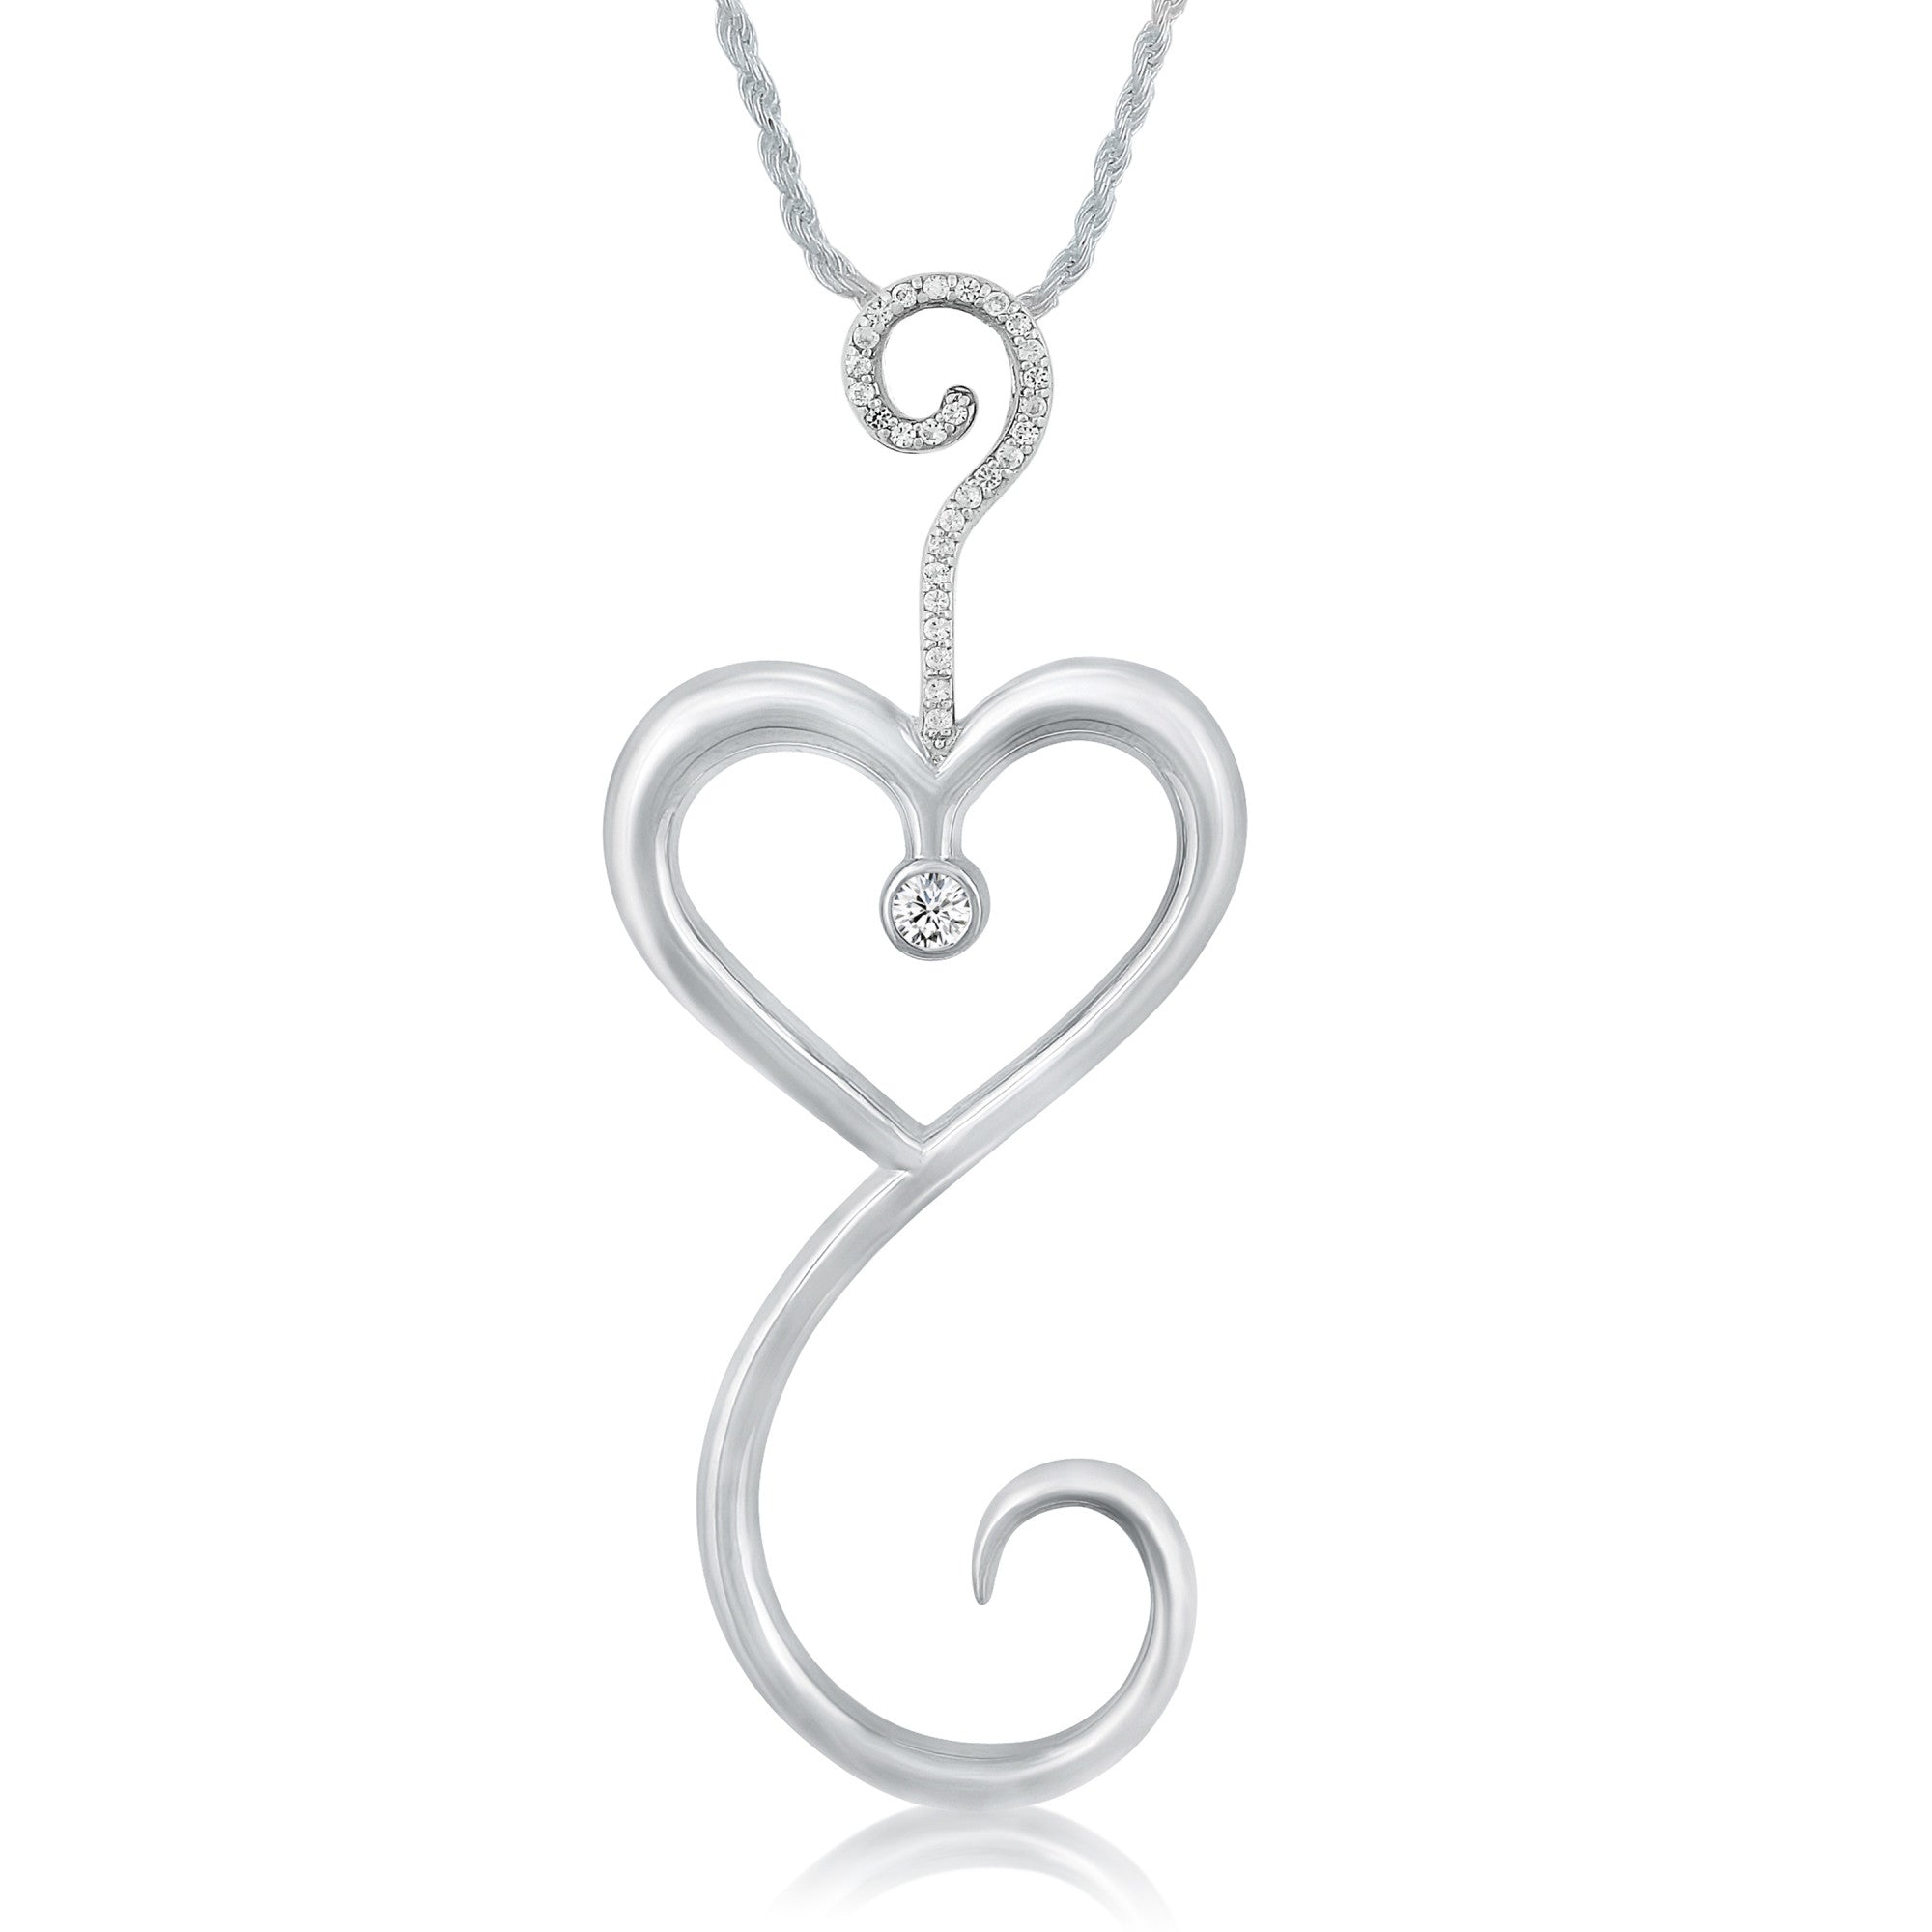 Intrikit Heart - Solid Sterling*Non Tarnish*Silver .925 with White Topaz  Pave and a 3mm White Sapphire Center Stone